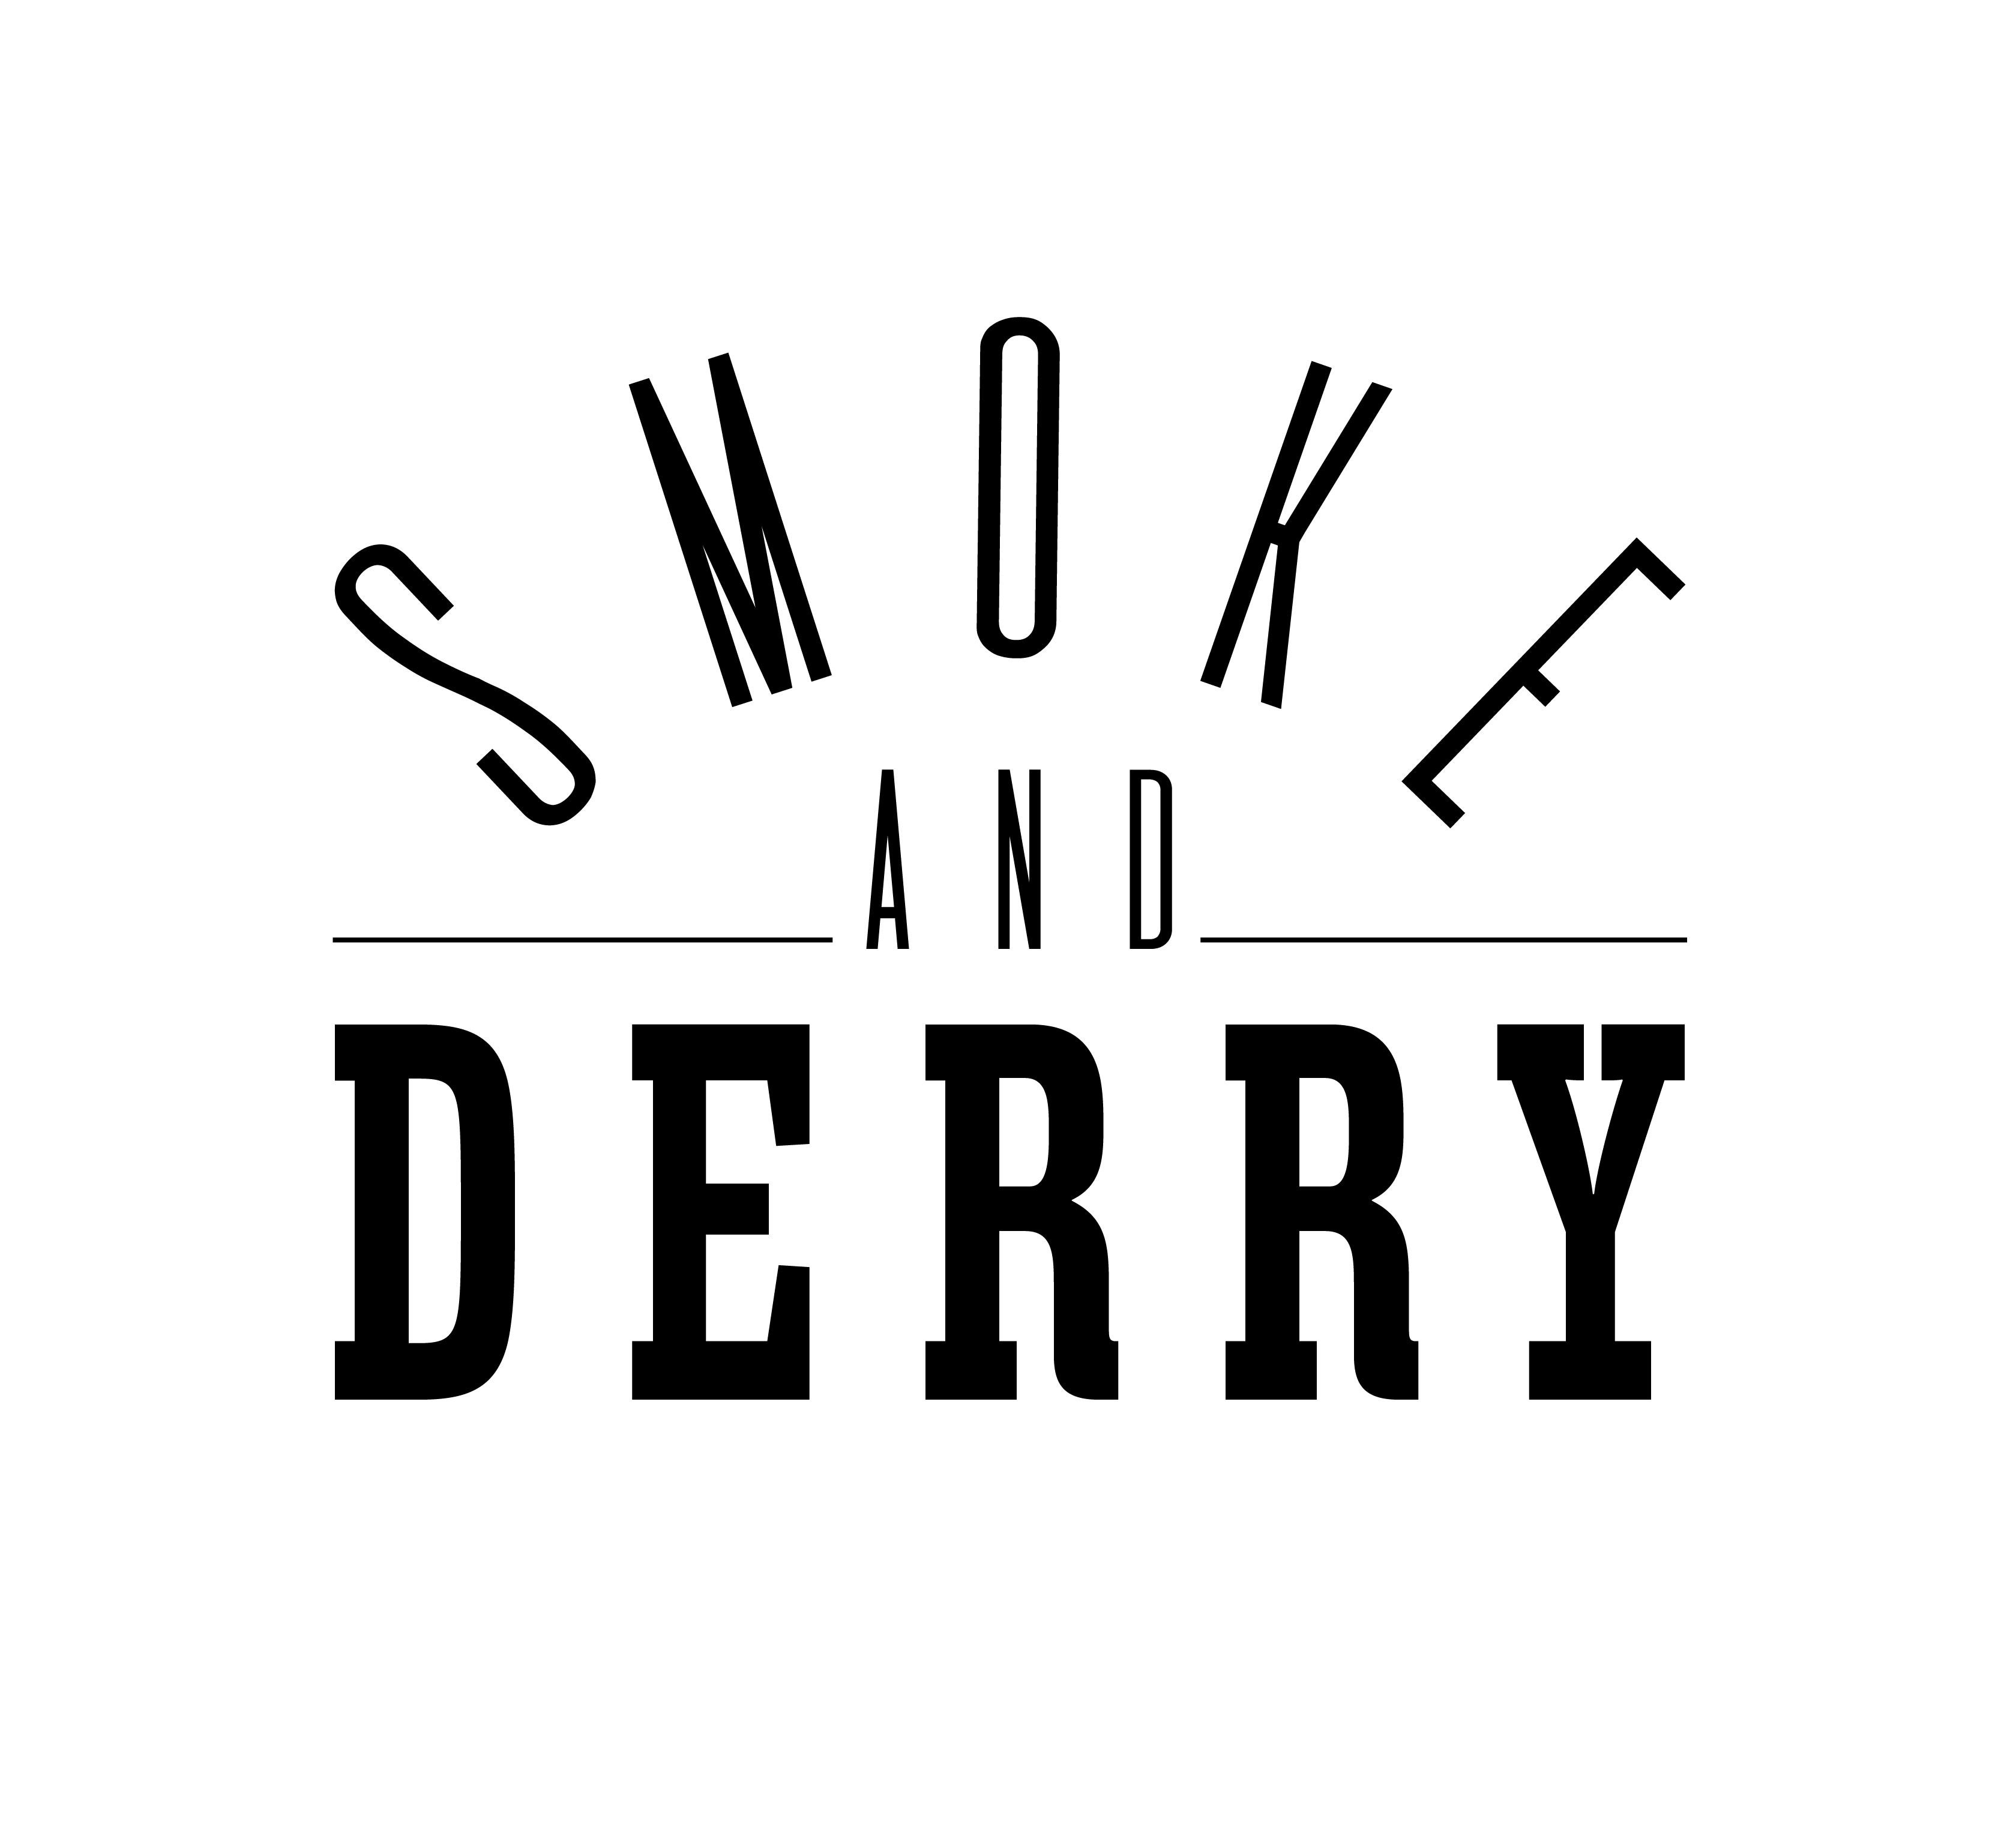 Outstanding Irish musicians collaborate to bring you top trad with a twist. Available to hire and fire for (almost) any event! info@smokeandderry.com